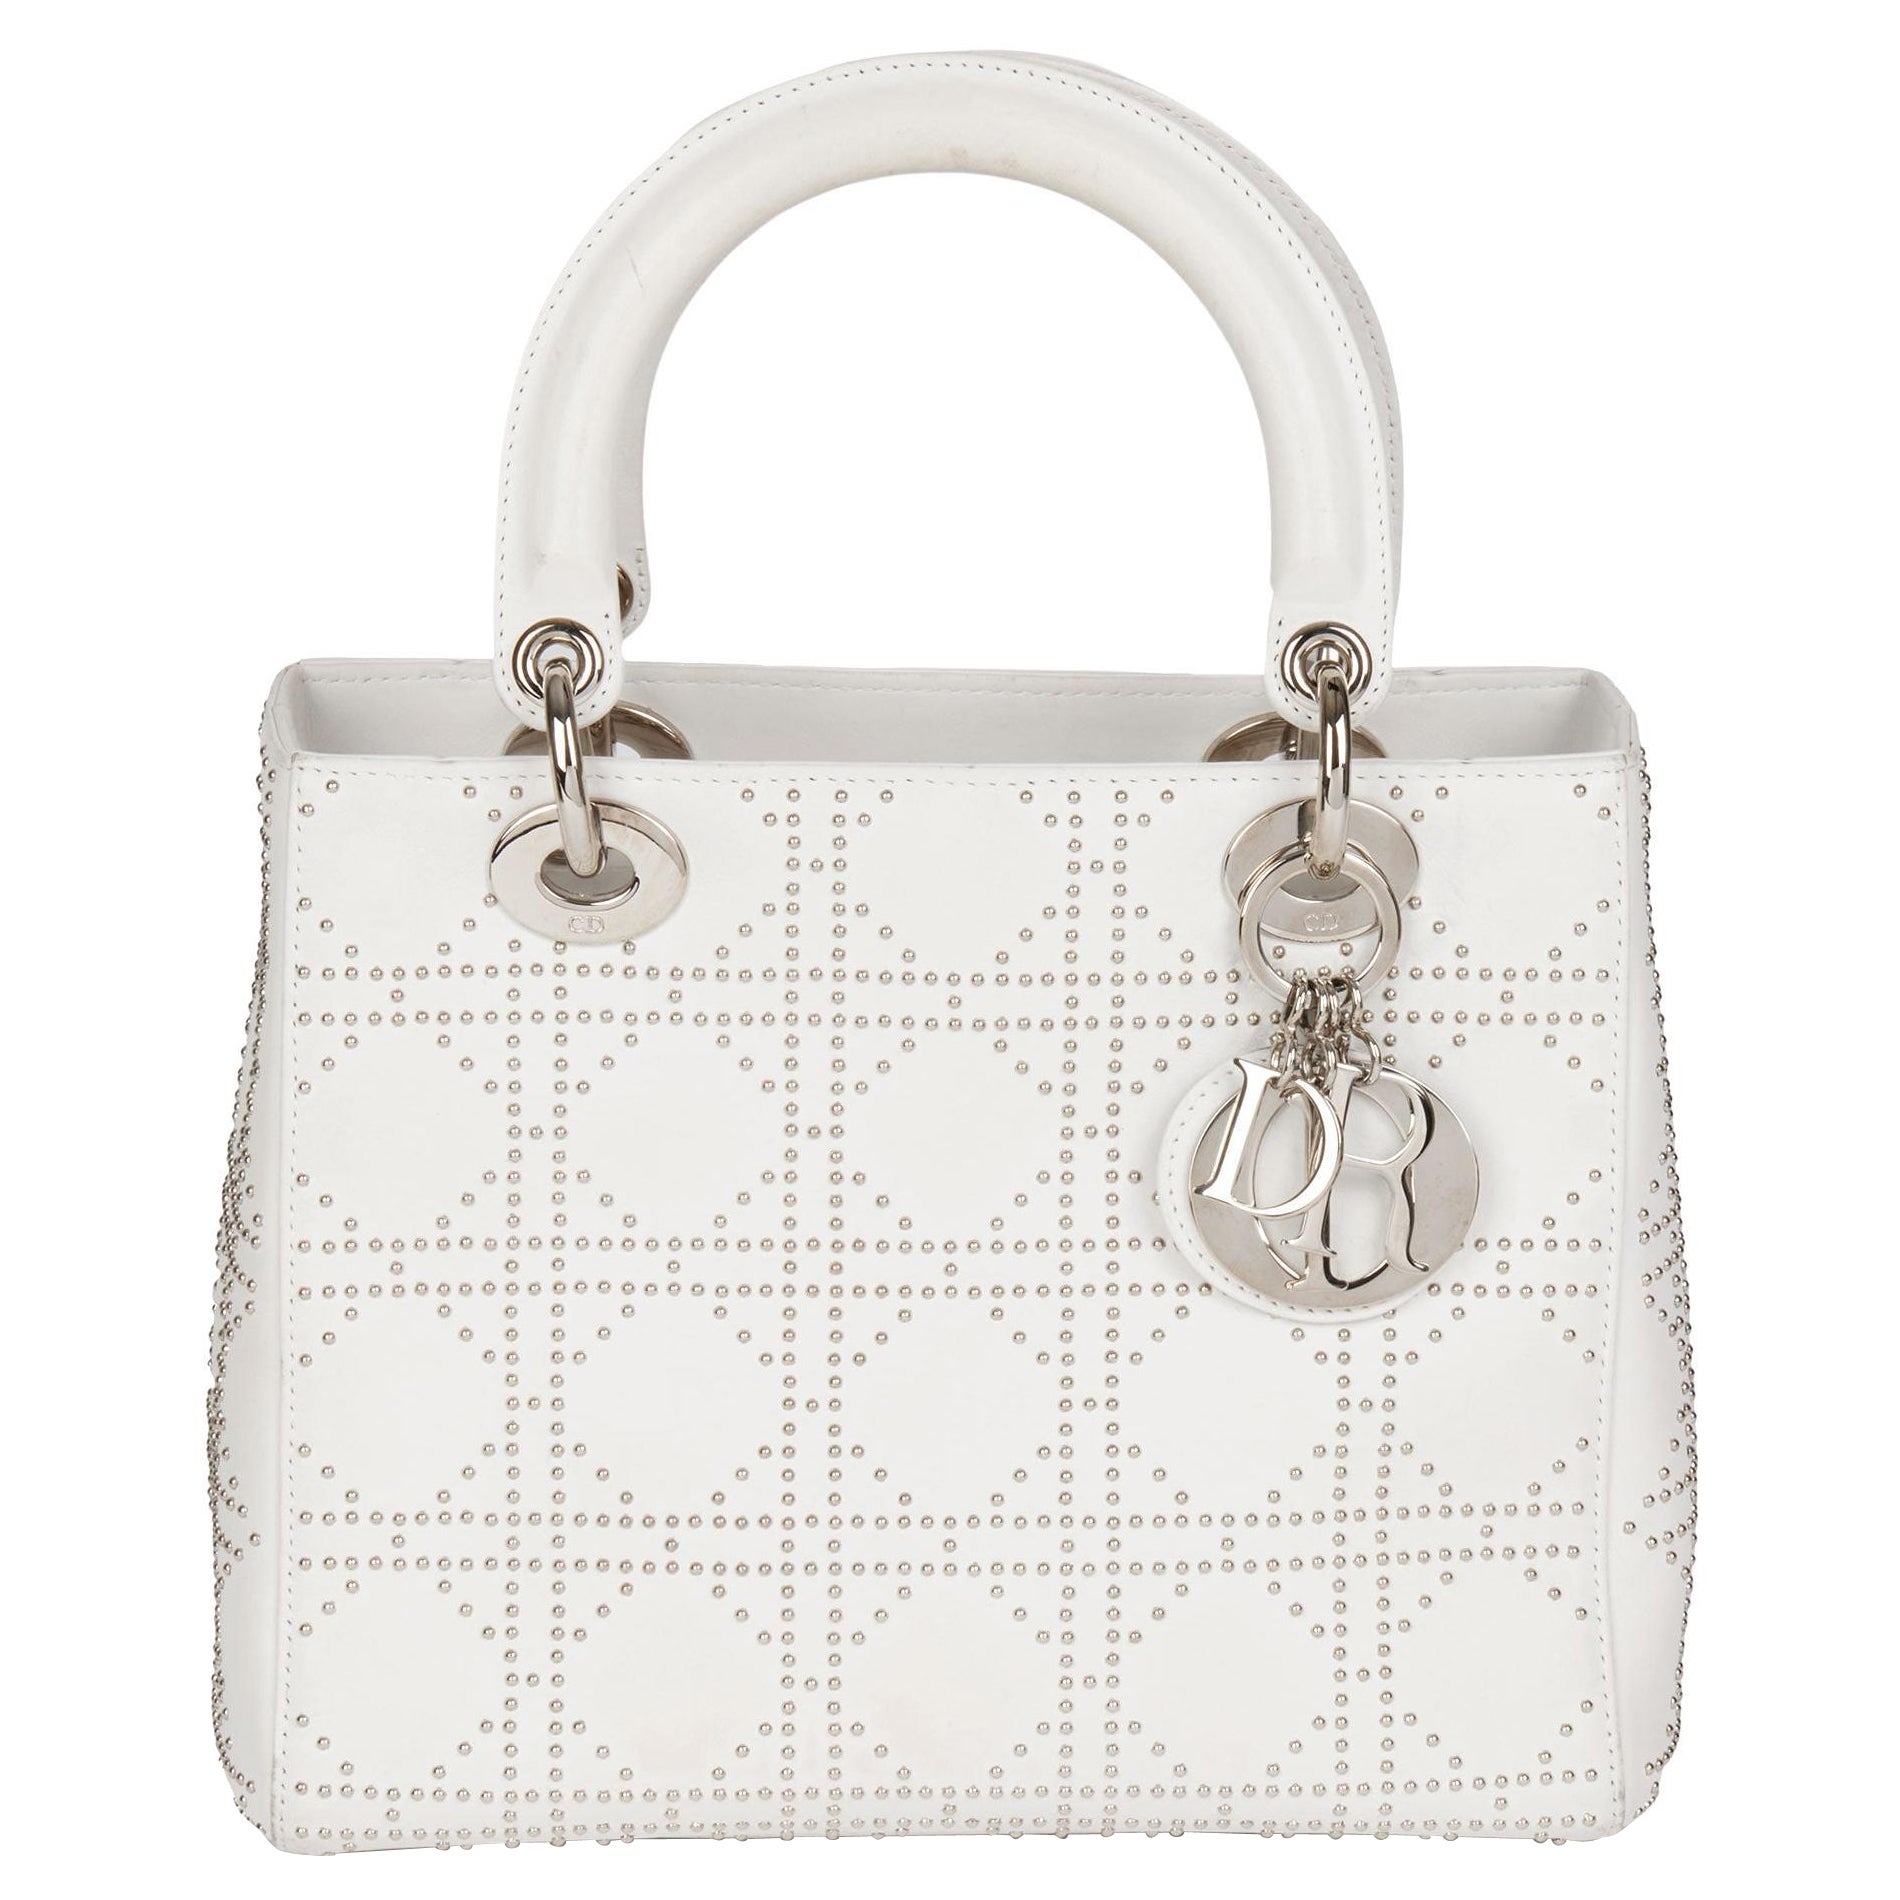 CHRISTIAN DIOR White Studded Calfskin Leather Medium Lady Dior For Sale